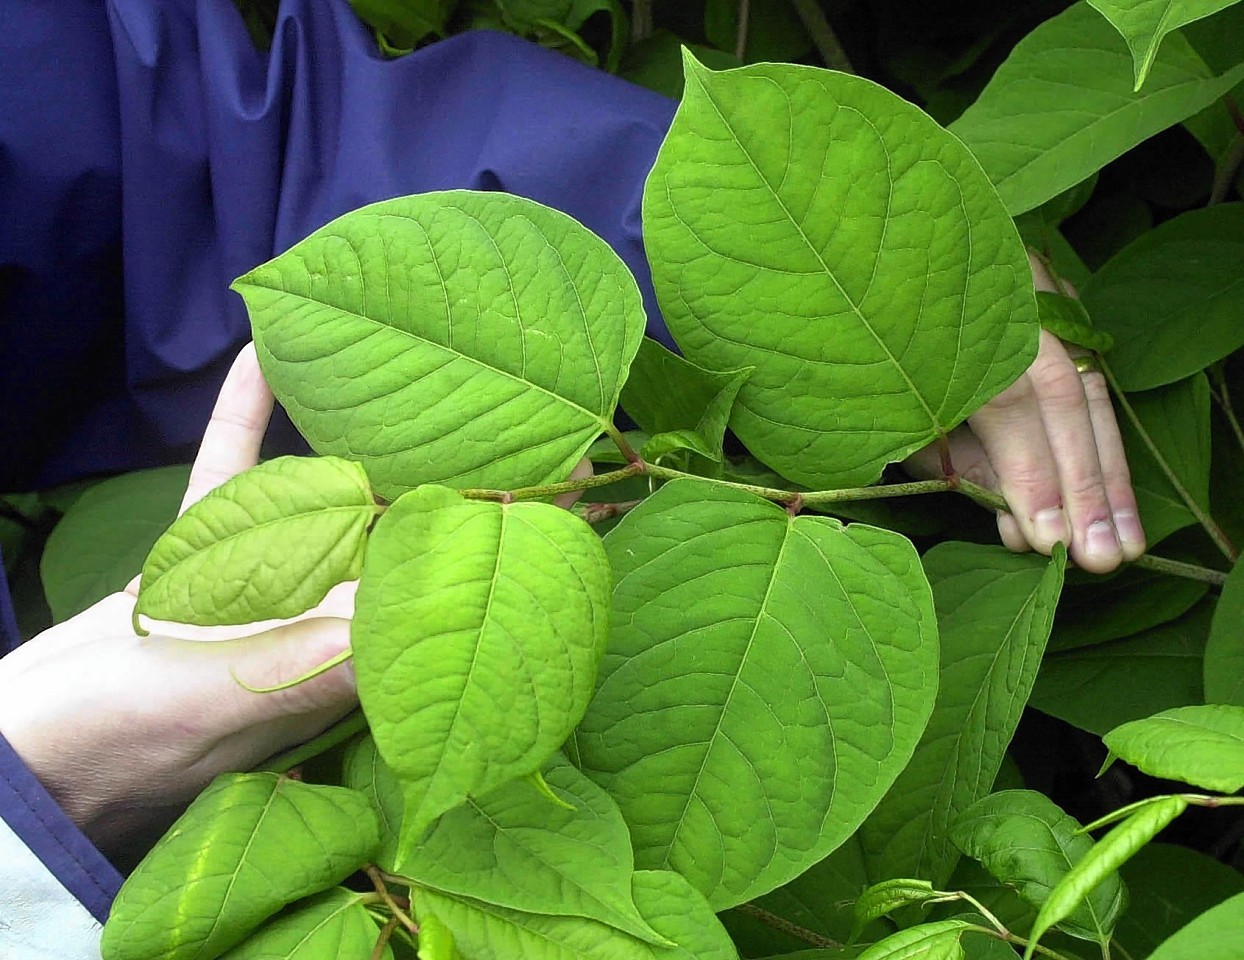 Japanese Knotweed is one such non-native invasive species which is threatening important habitats